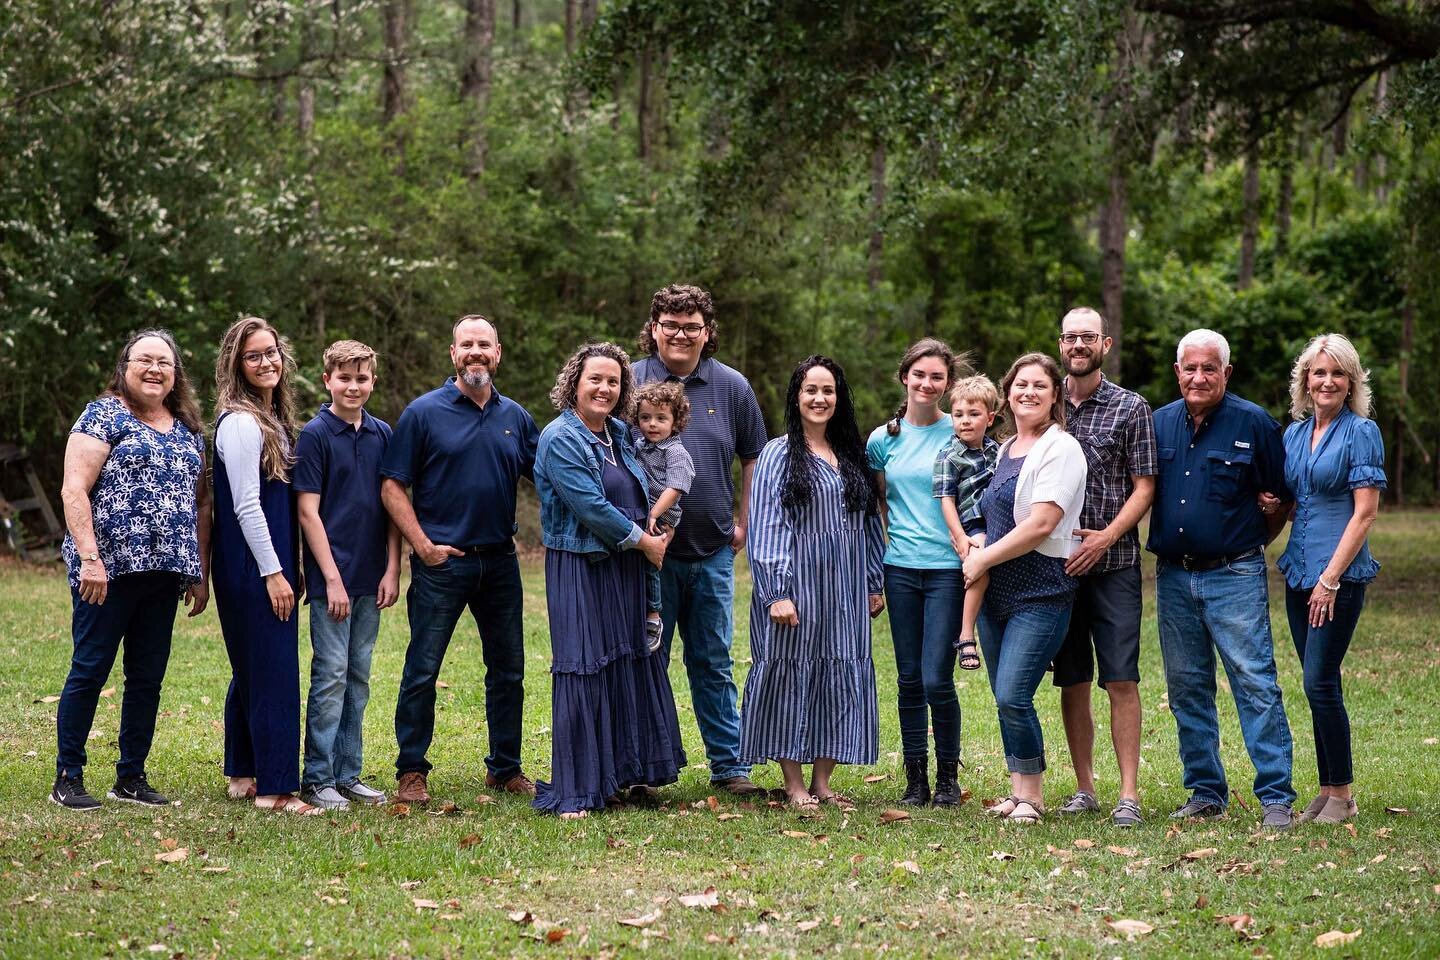 Family photos with your extended family. It takes a little more coordination, but having those memories documented is worth it!

Putting the finishing touches on this sweet family&rsquo;s gallery before I get it sent out today. 

.
.
.
#sadiestarkeph